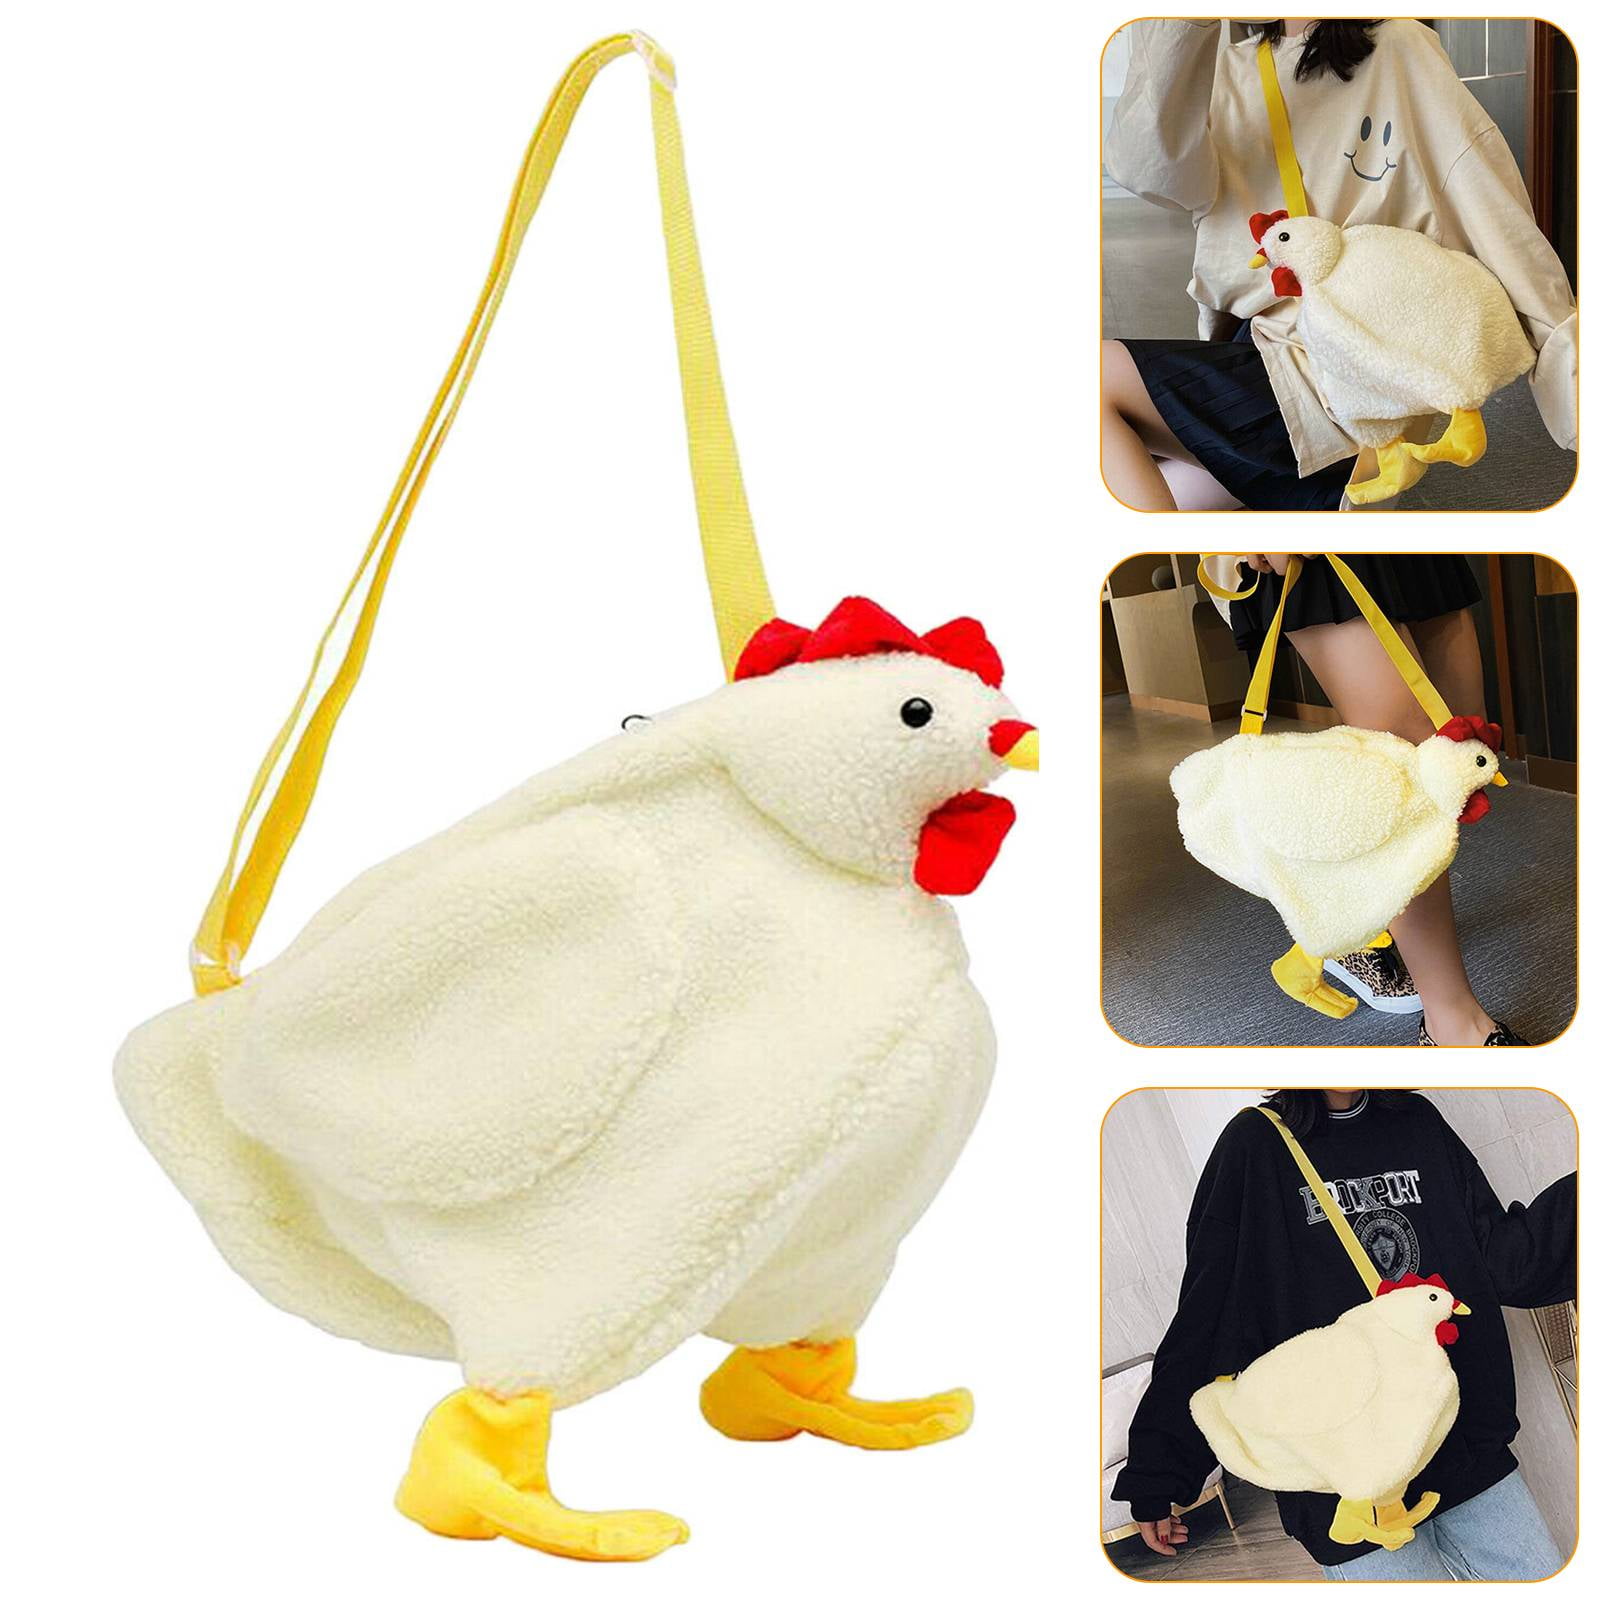 Simulated Foods Purse Wallets Women Zipper Plush Vegetable Meat Carrot Coin Purse Girls Casual